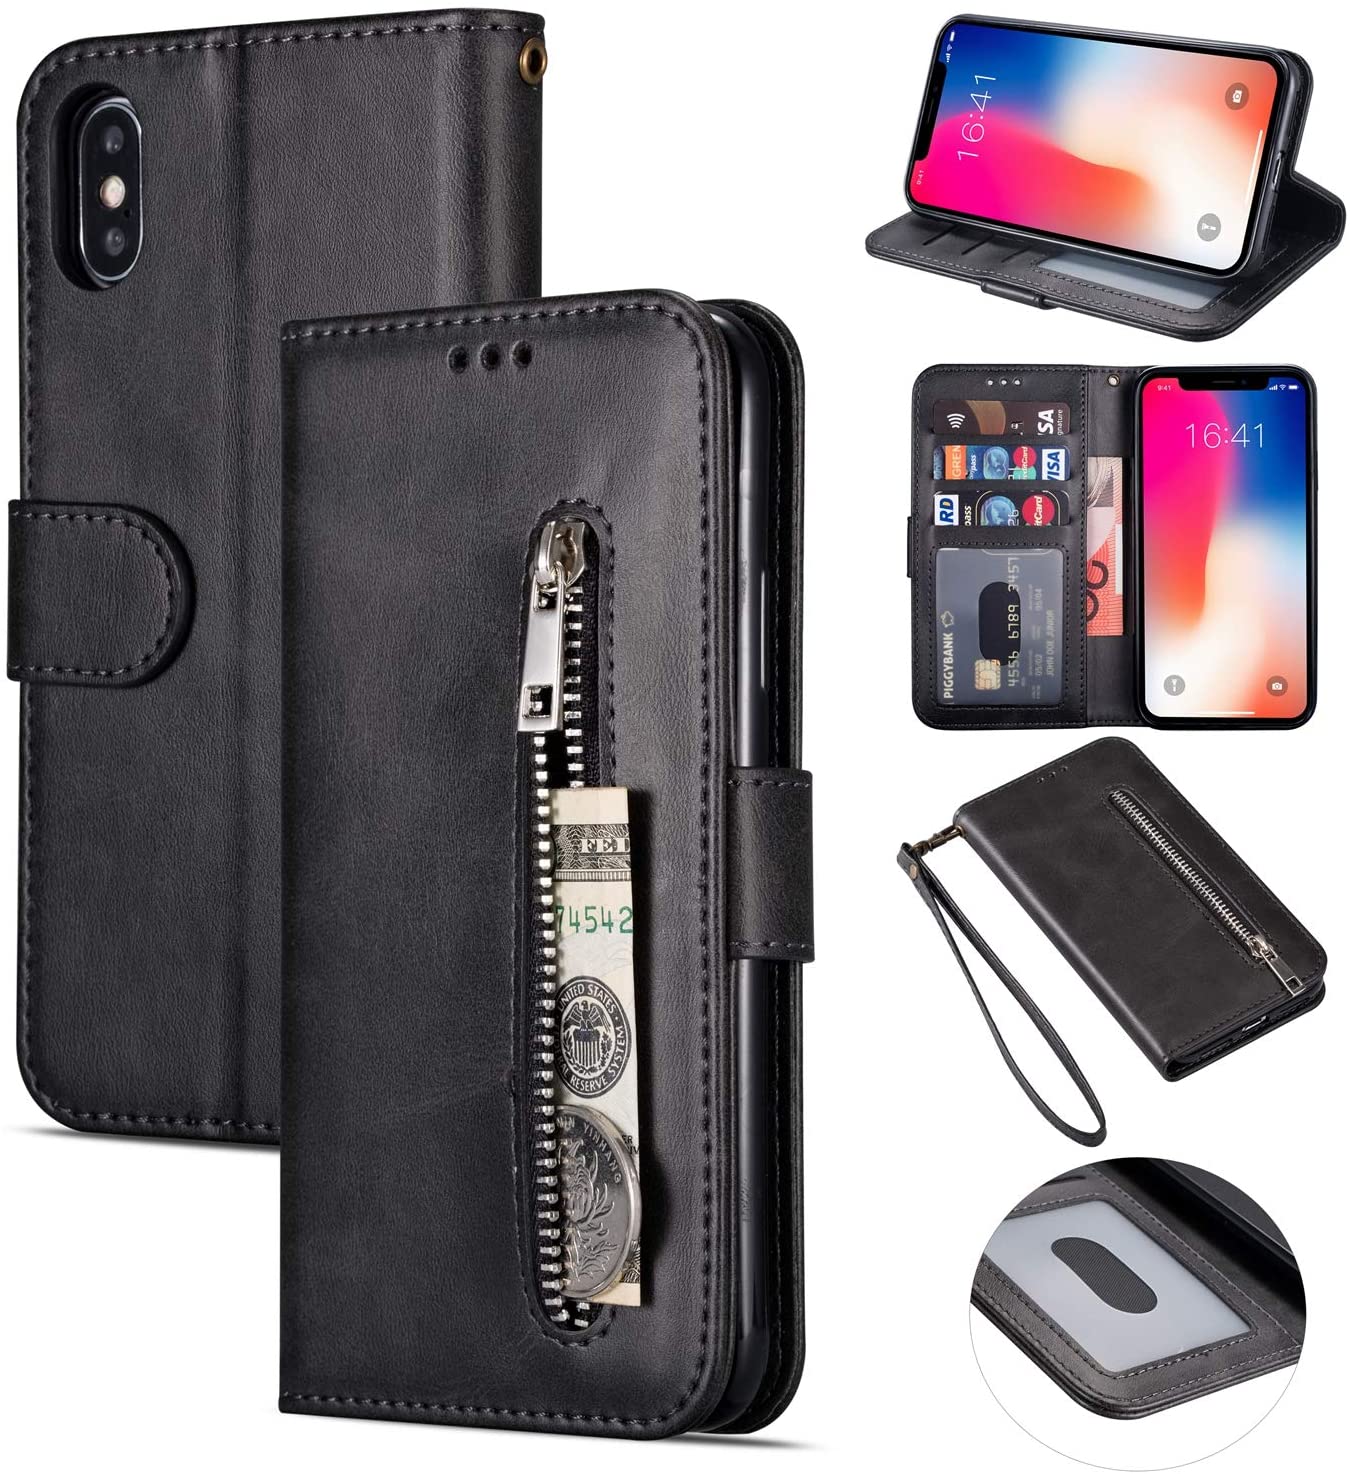 Zipper Wallet Case with Black Dual-use Pen for iPhone 6 Plus,Aoucase Money Coin Pocket Card Holder Shock Resistant Strap Purse PU Leather Case for iPhone 6 Plus/6S Plus 5.5 Dark Blue 